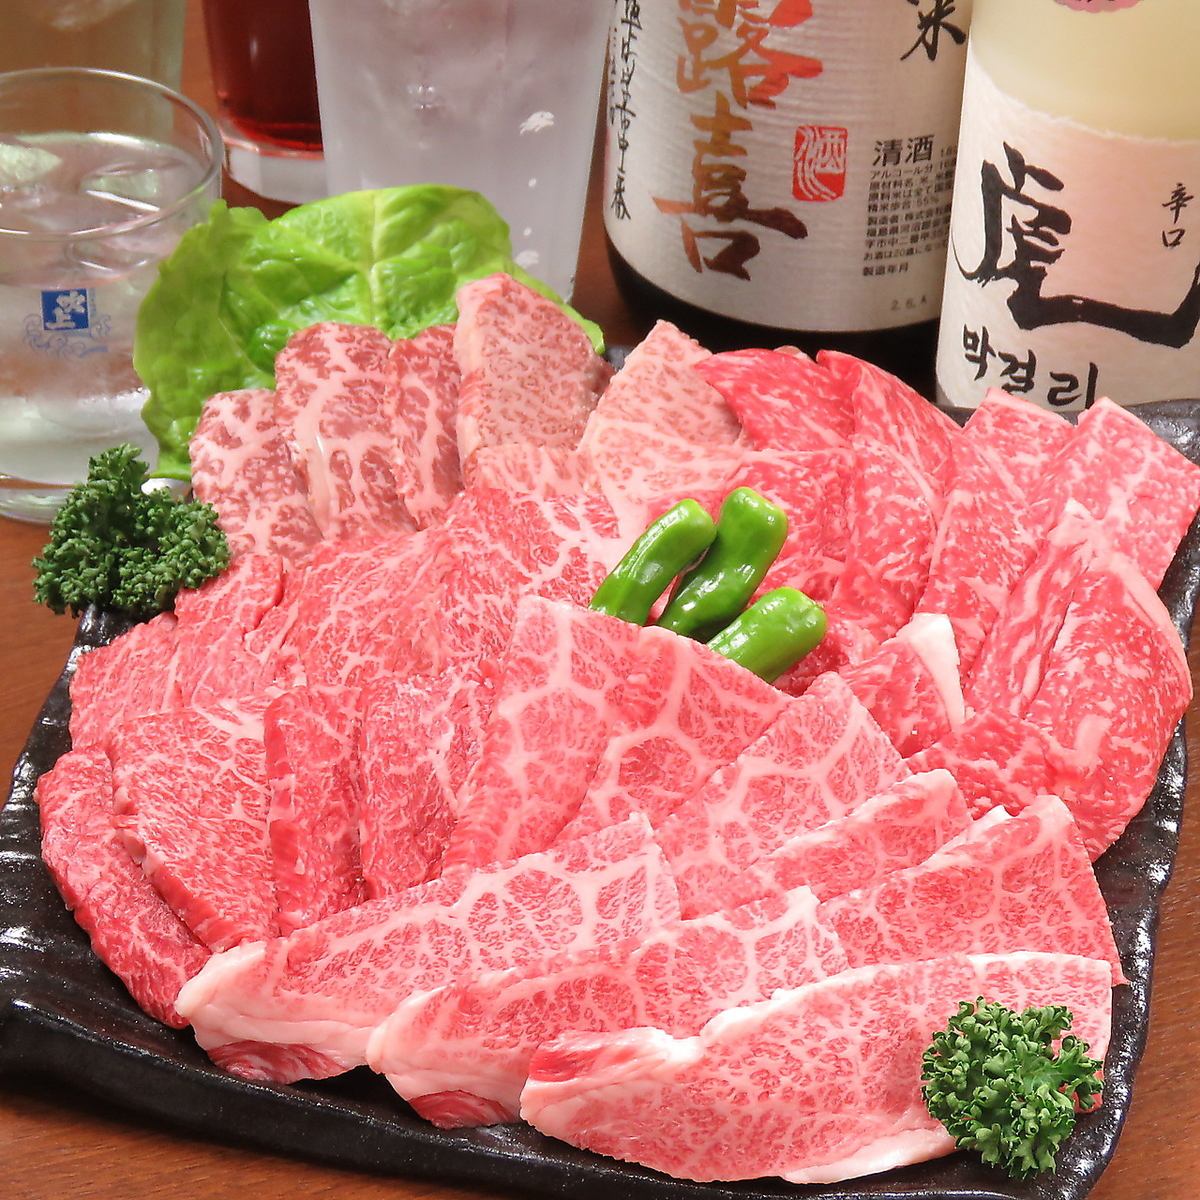 We have special Japanese black beef meat! Enjoy it with beer!